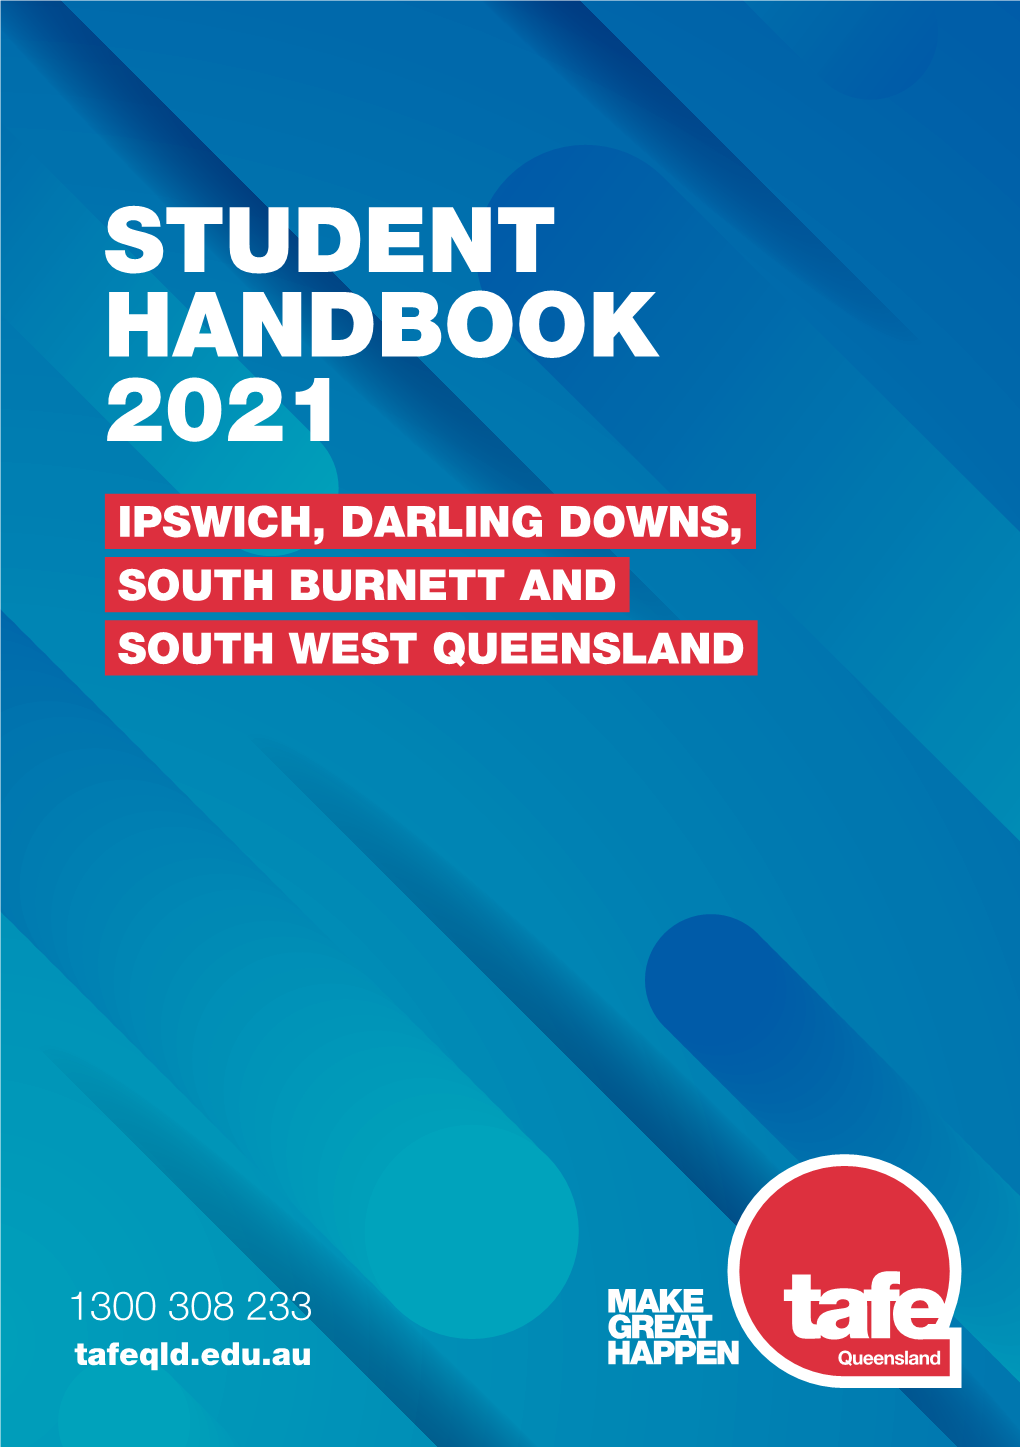 Student Handbook 2021 Ipswich, Darling Downs, South Burnett and South West Queensland